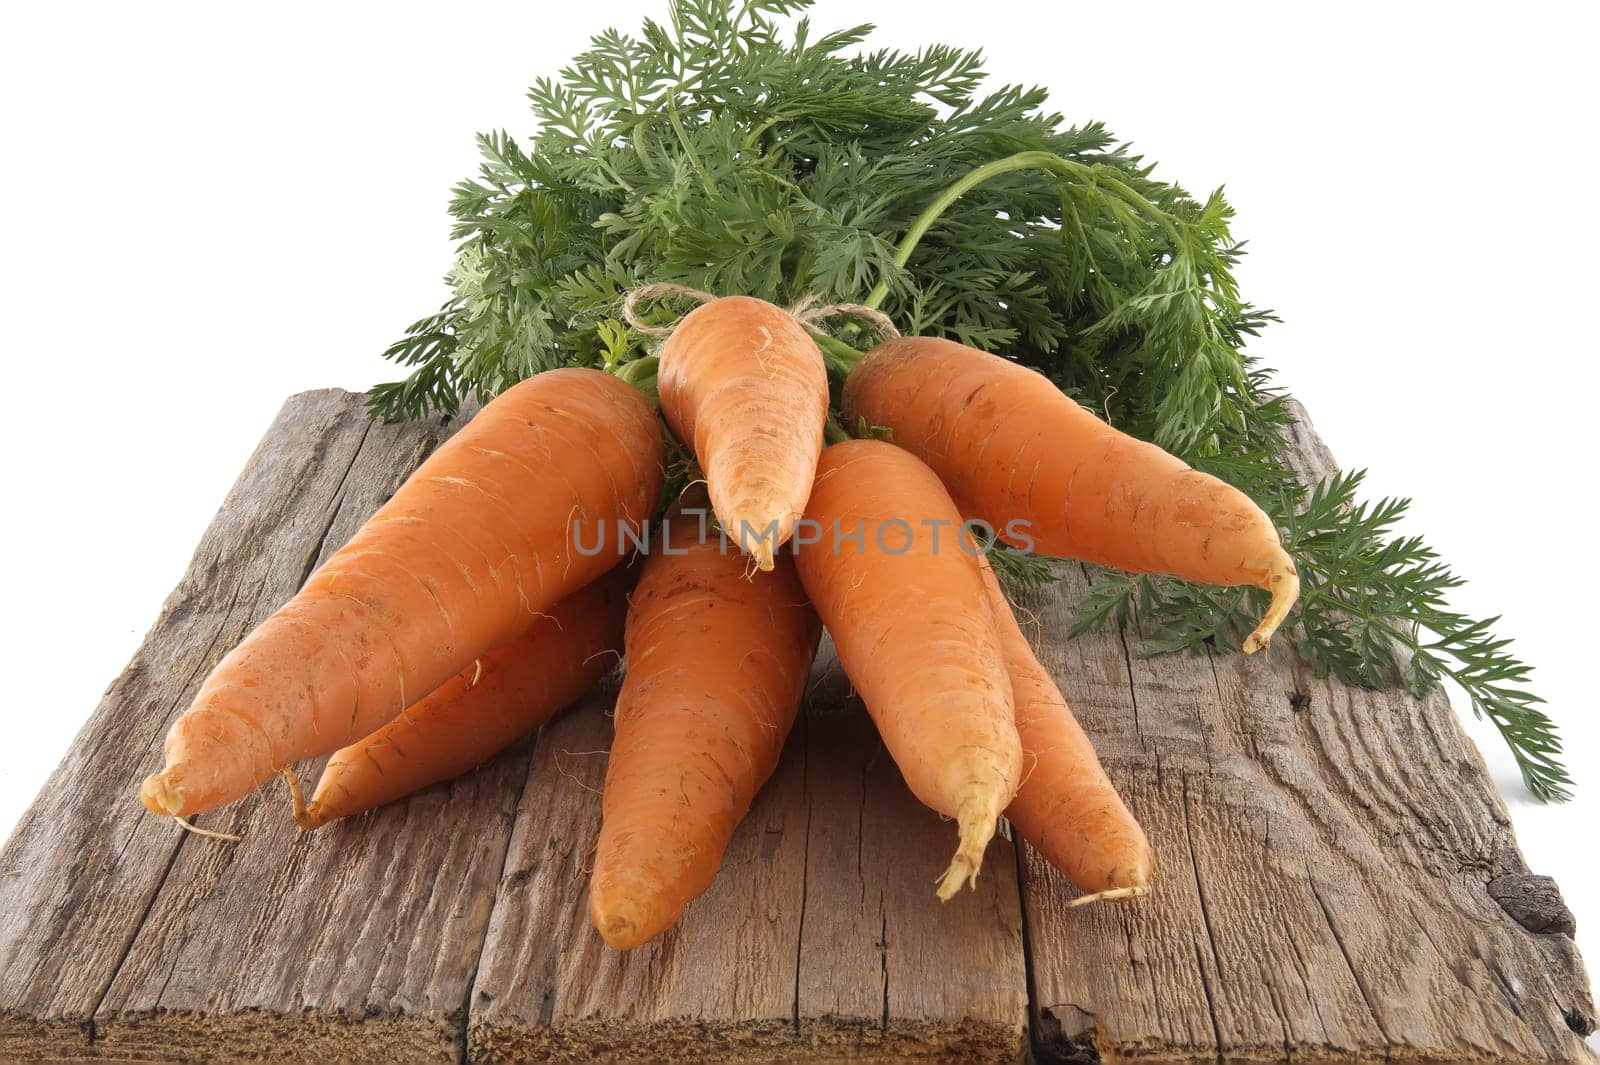 Bunch of fresh, orange carrots with green tops is neatly tied together using twine and positioned on an old, rustic wooden table